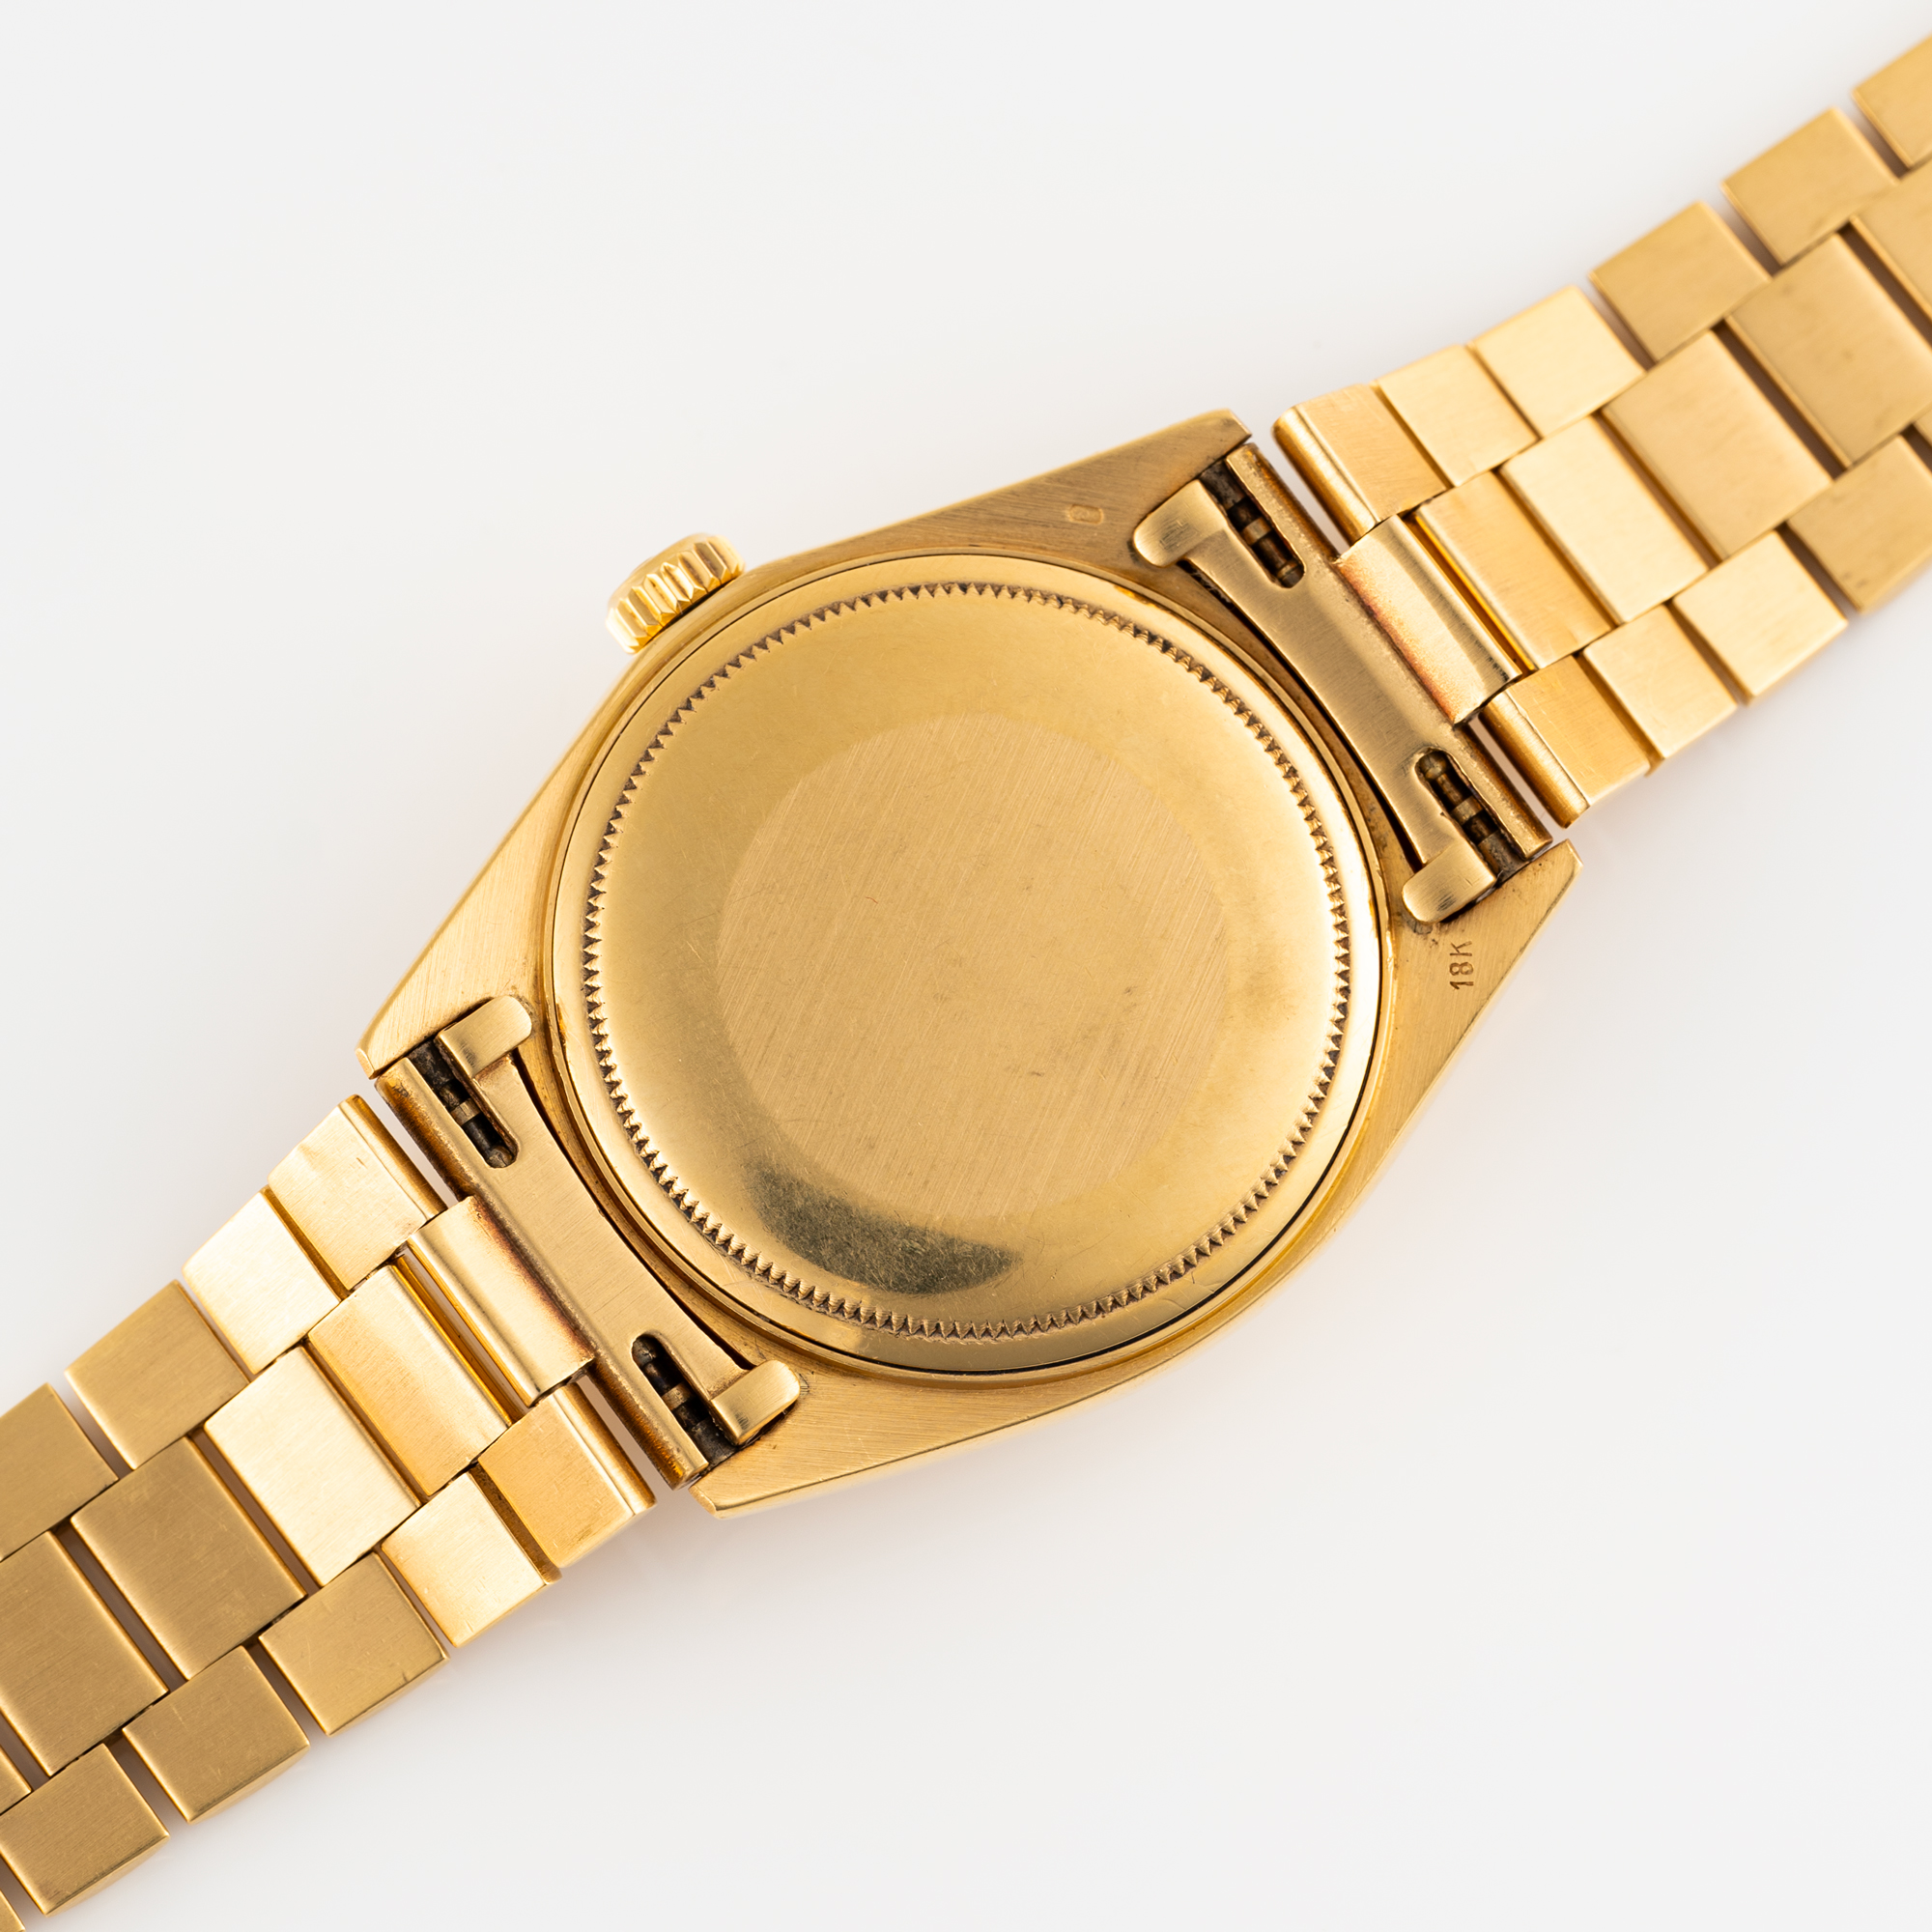 A GENTLEMAN'S SIZE 18K SOLID YELLOW GOLD ROLEX OYSTER PERPETUAL DAY DATE BRACELET WATCH CIRCA - Image 8 of 9